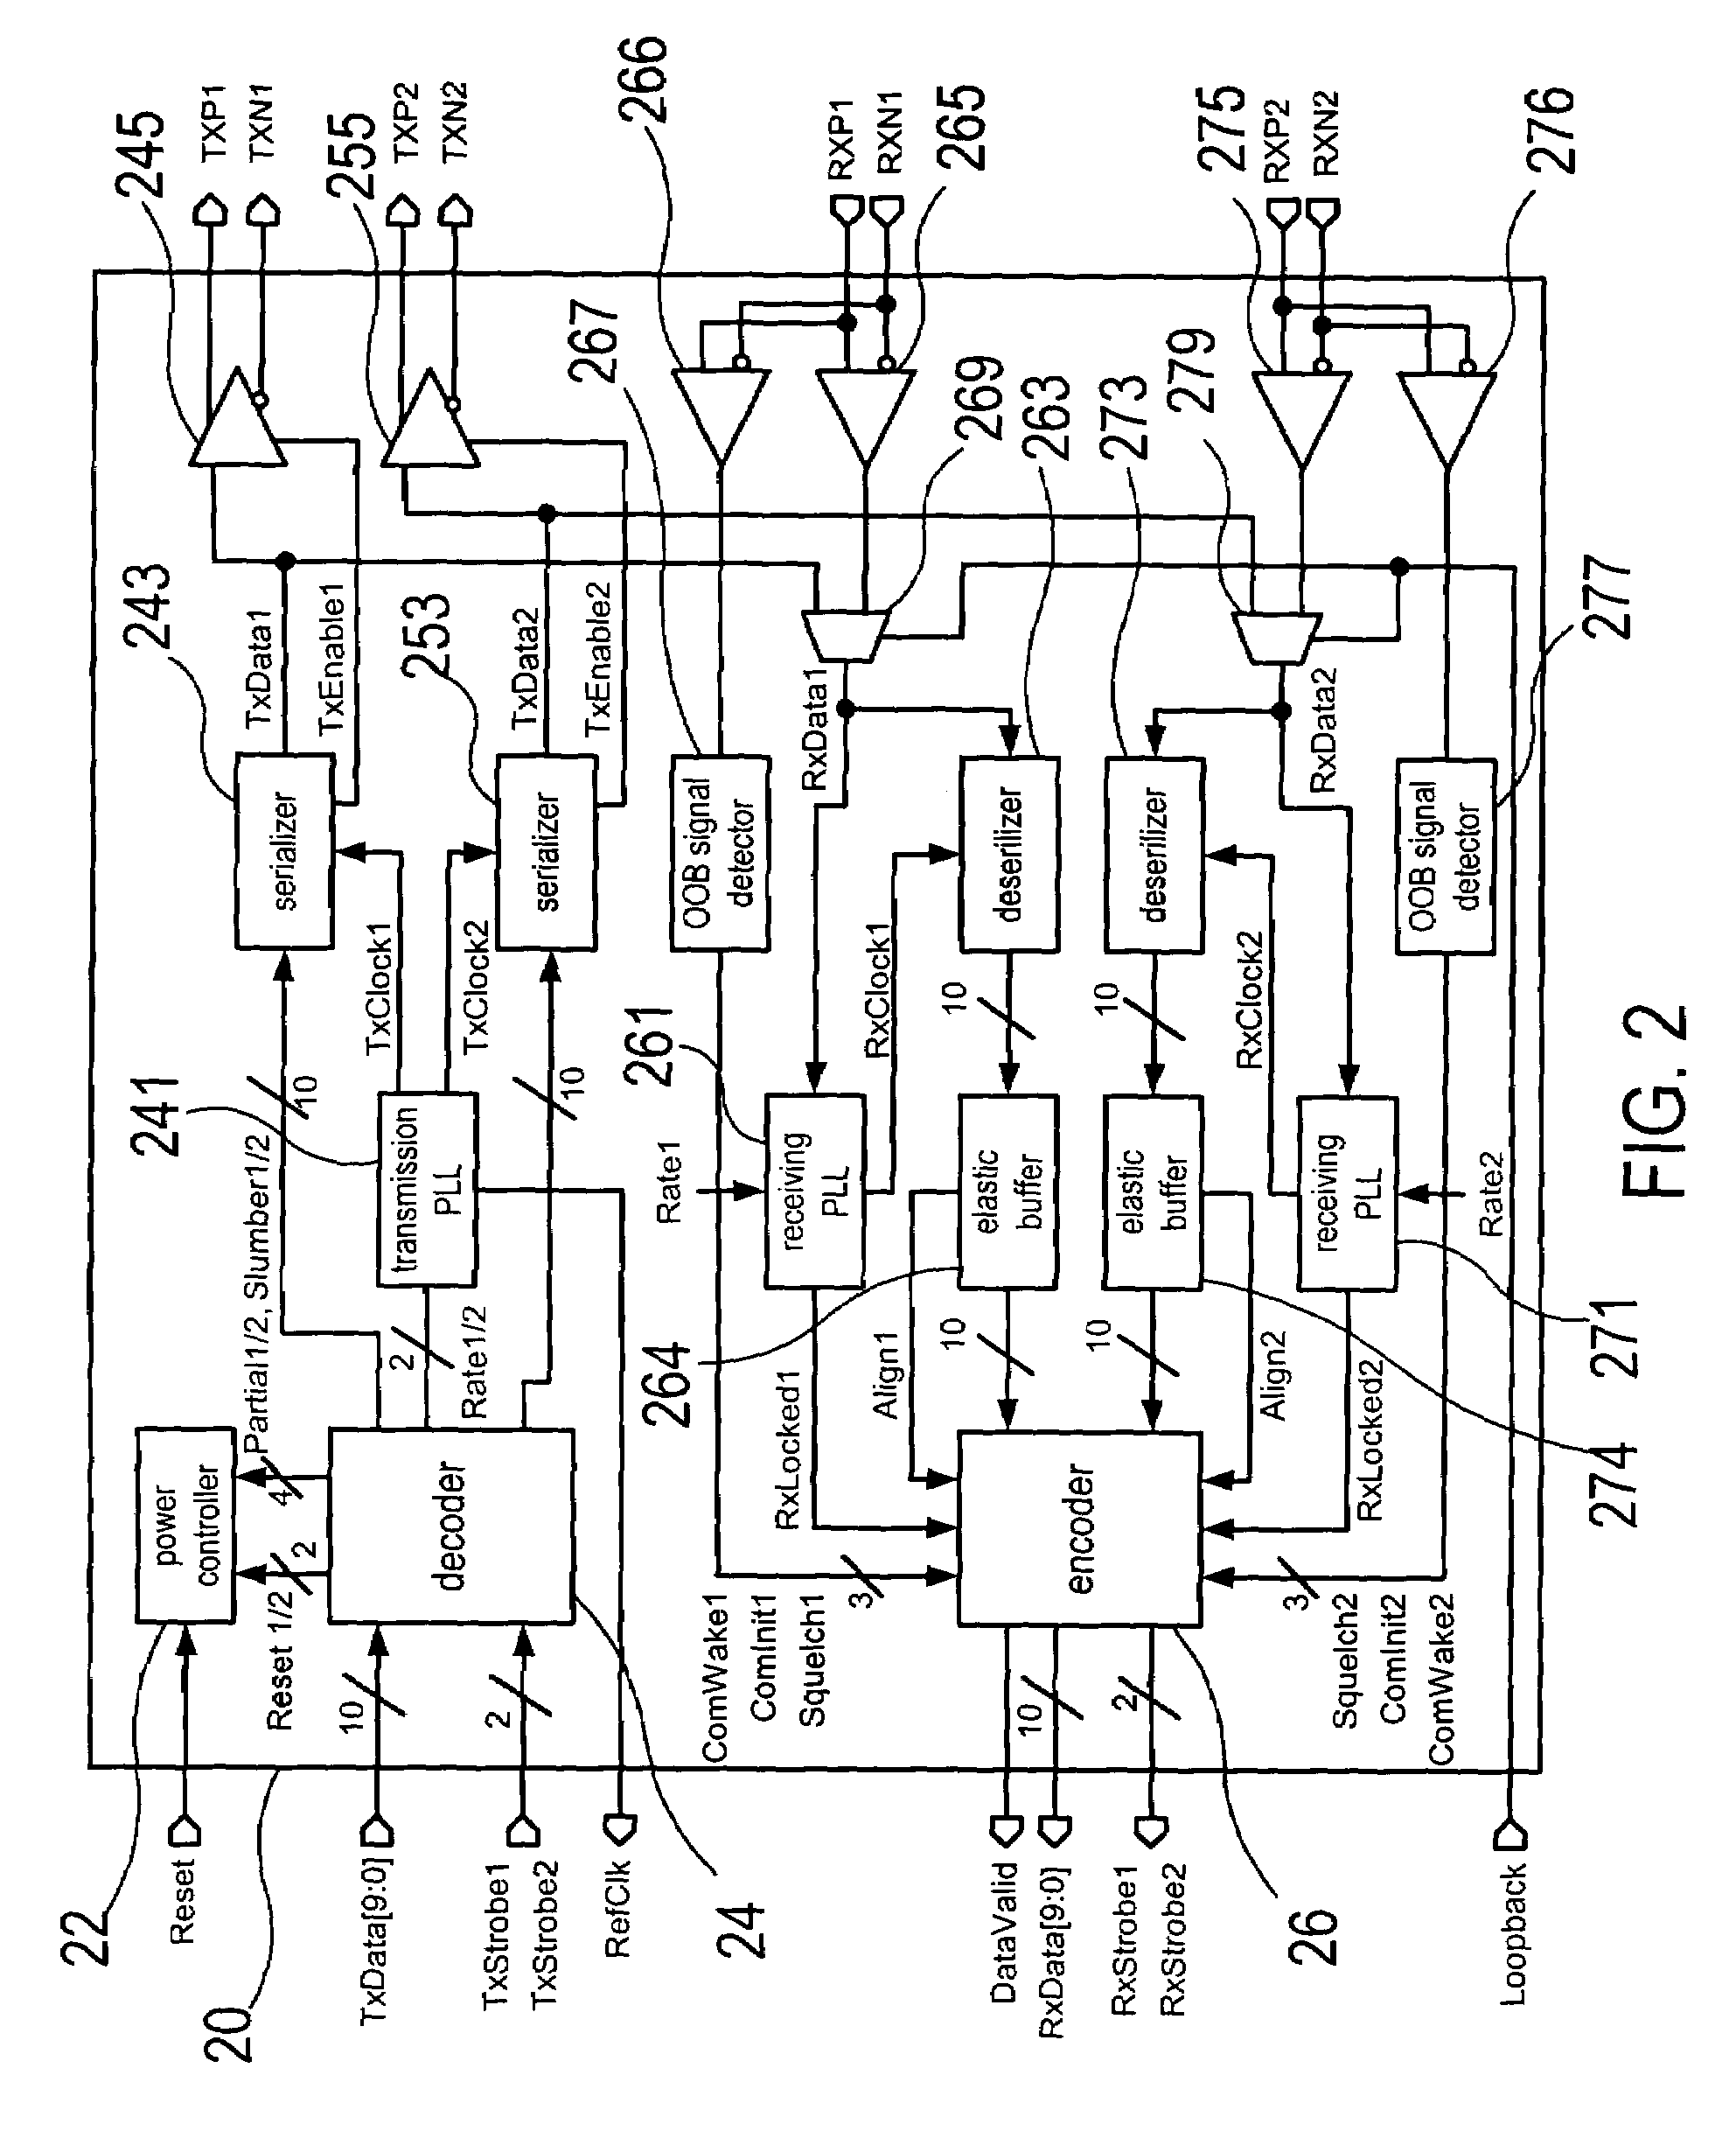 Circuit structure and signal encoding method for a serial ATA external physical layer